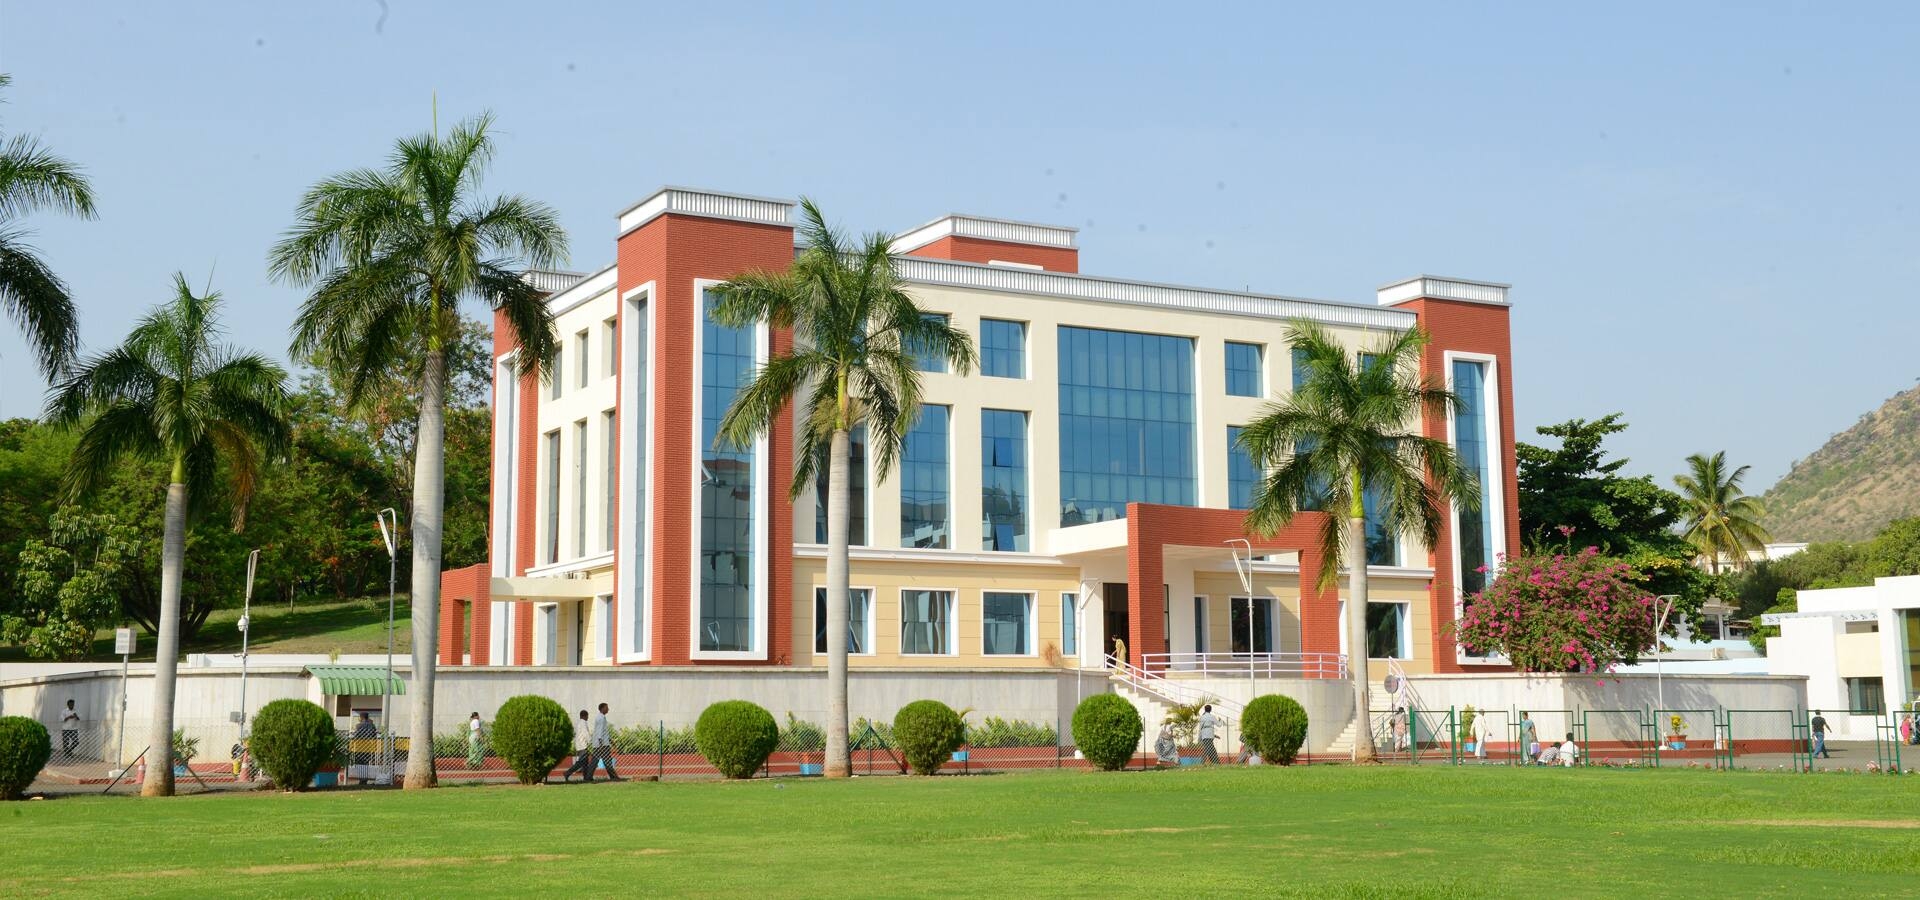 Stock Name: Krishna Institute of Medical Sciences&nbsp;Mutual fund companies in India like the Mirae Asset Emerging Blue Chip Fund, Axis Flexi Cap Fund and the Mirae Asset Tax Saver Fund have invested  <span class='webrupee'>₹</span>1526 cores in this company with a total market cap of  <span class='webrupee'>₹</span>10,276 crores.